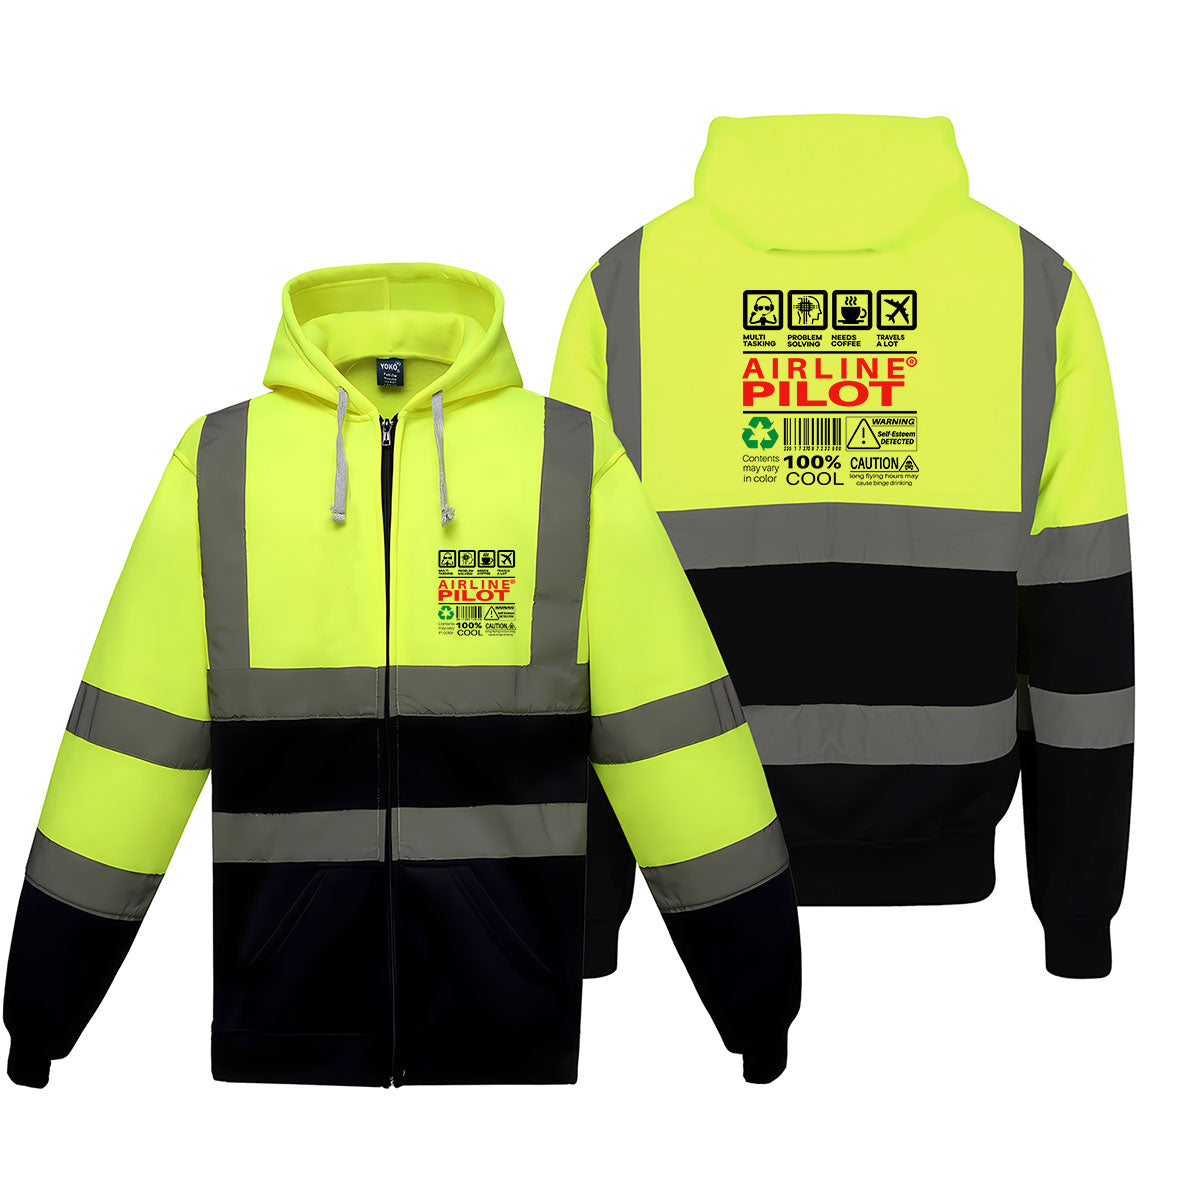 Airline Pilot Label Designed Reflective Zipped Hoodies